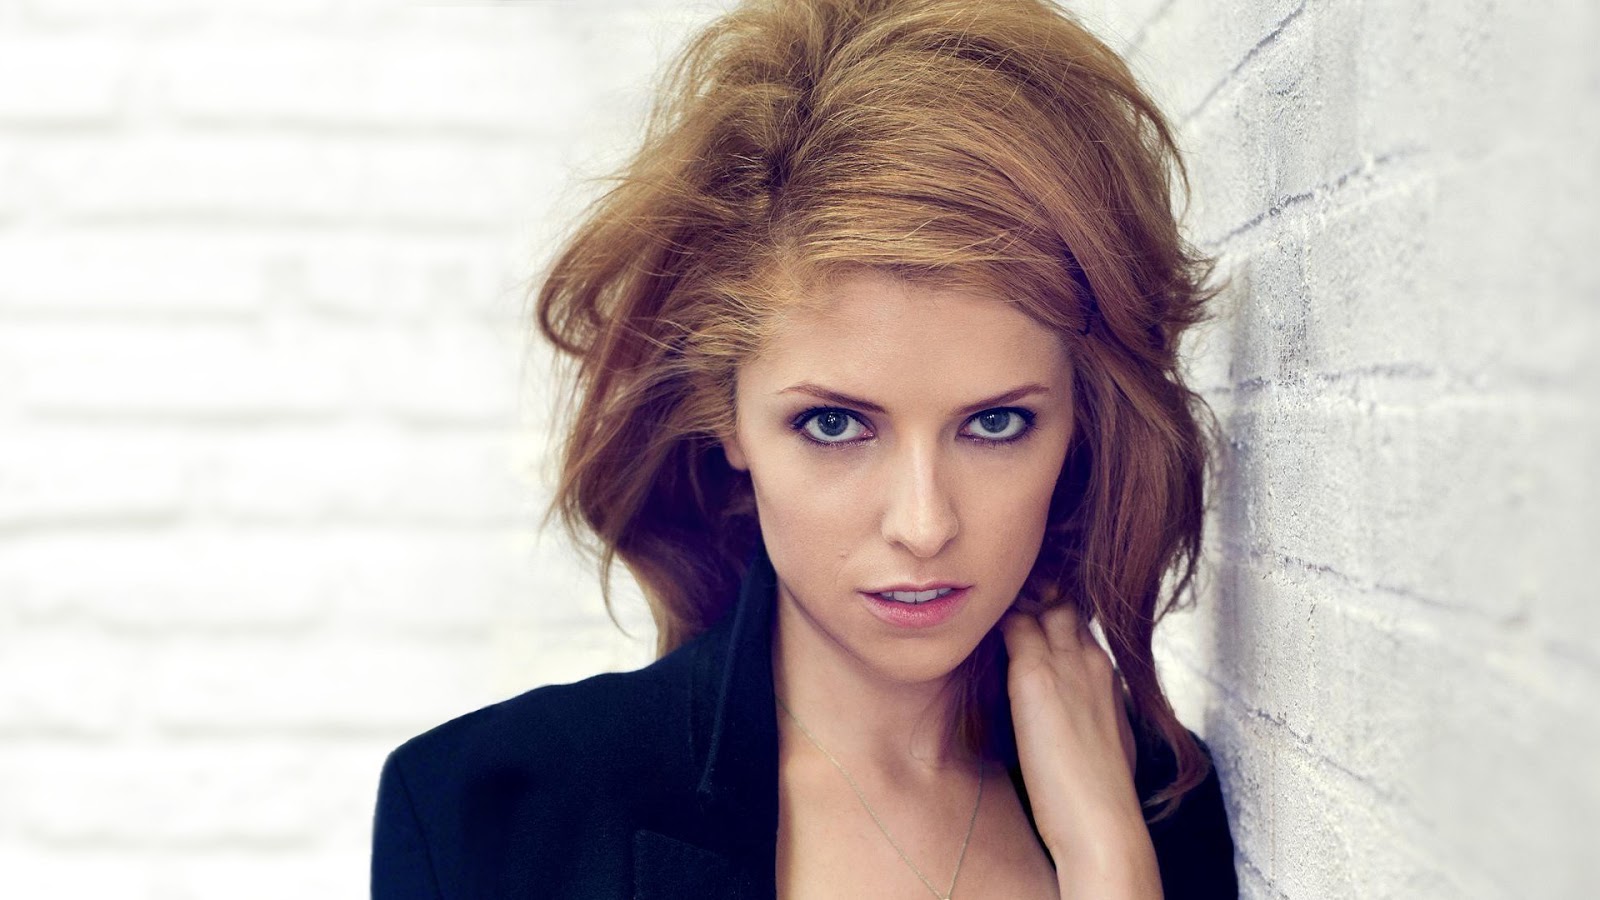 Anna Kendrick HD Images and Wallpapers - Hollywood Actress